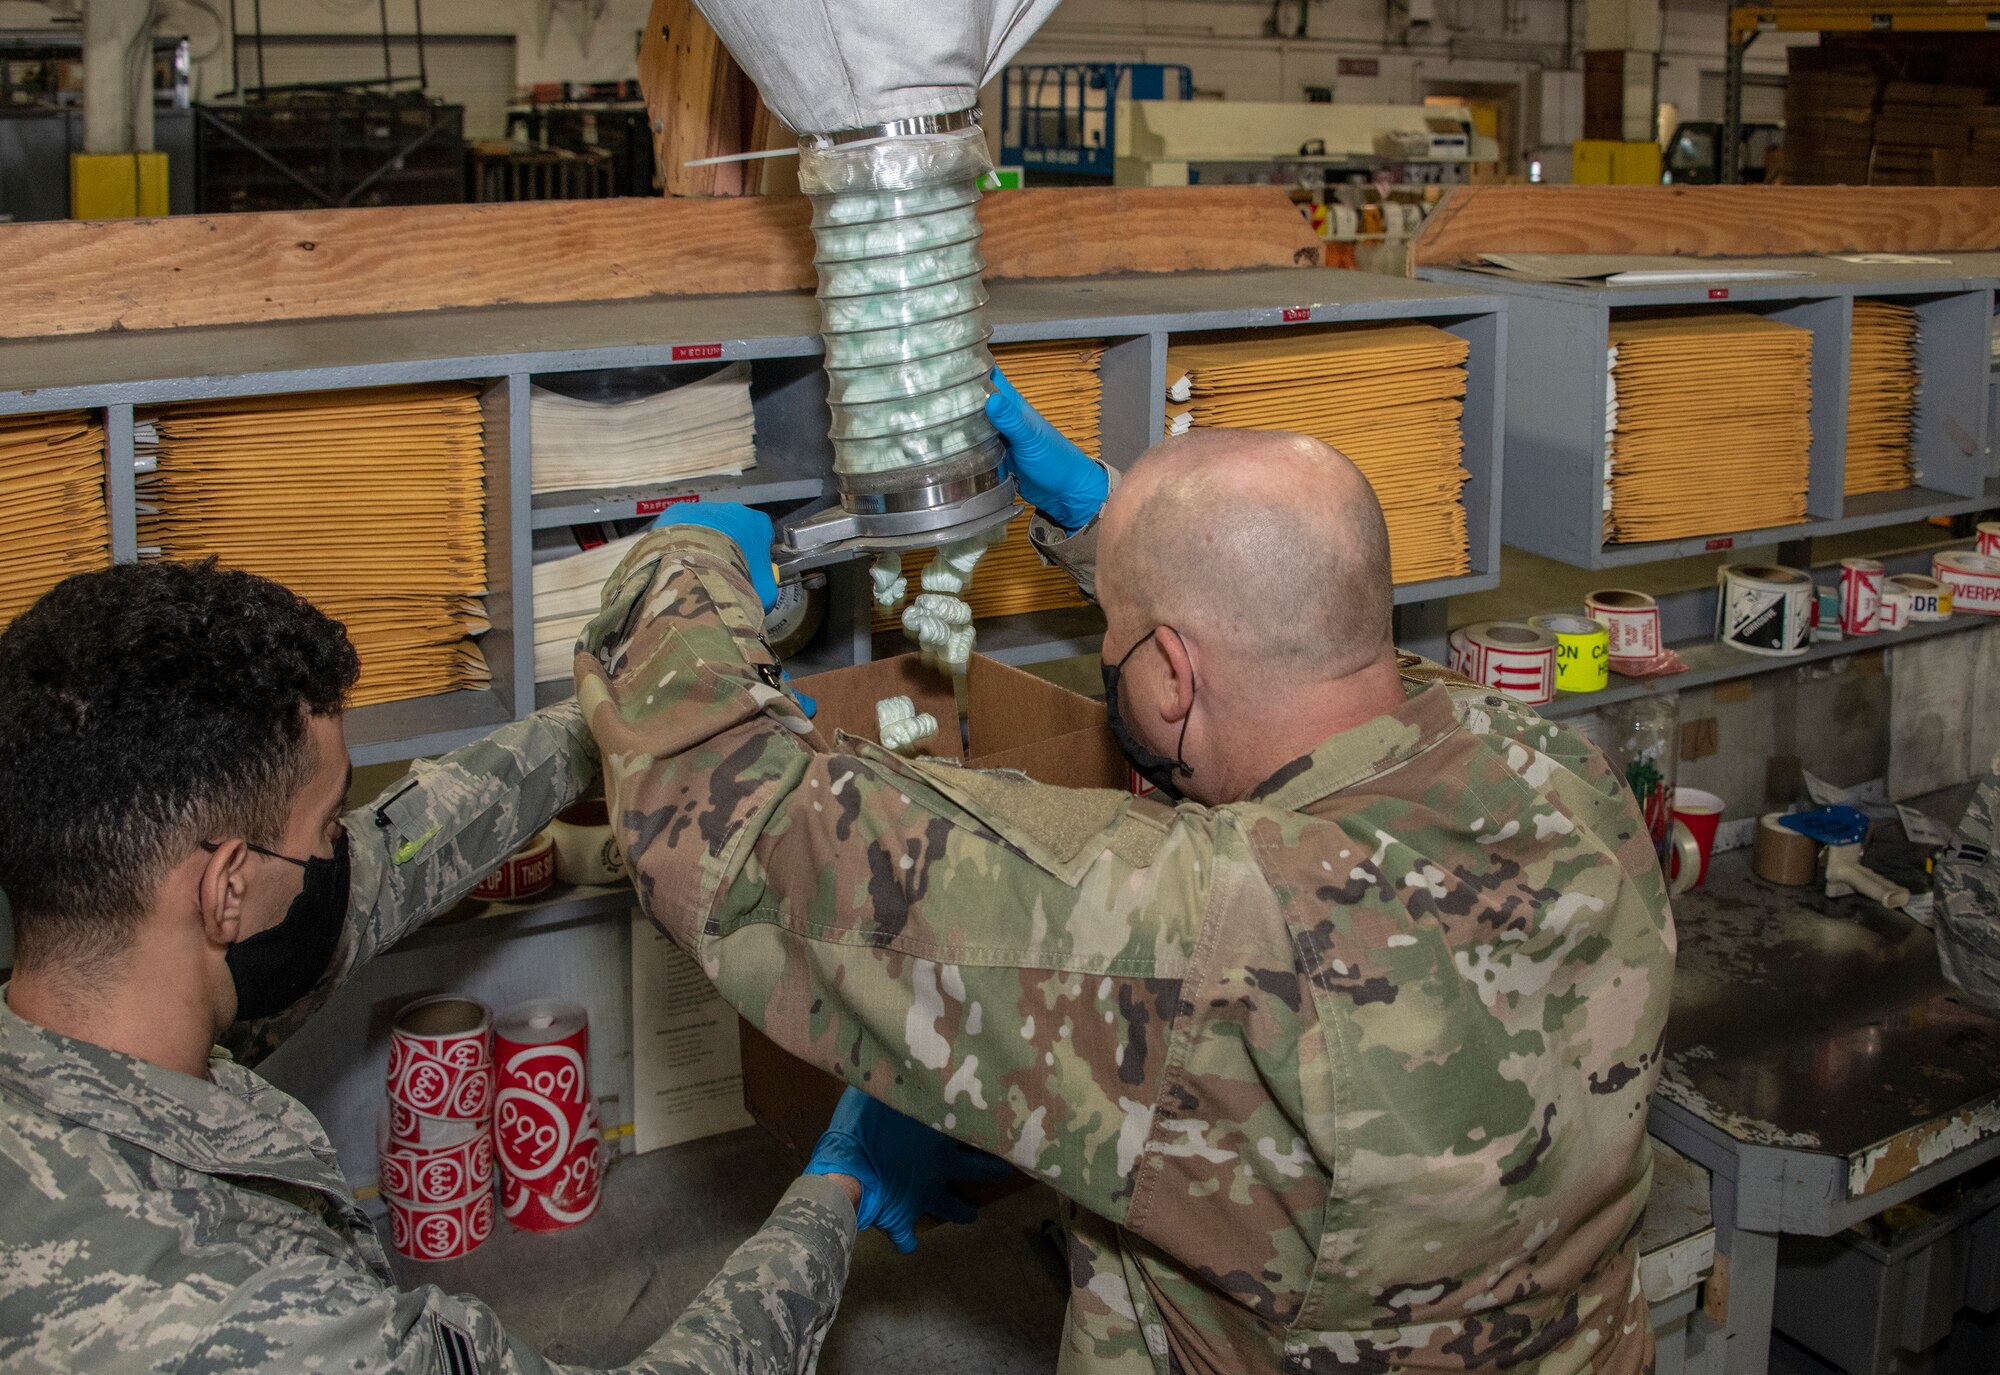 U.S. Air Force Airman 1st Class Yaser Belal, left, 60th Aerial Port Squadron packing and crating technician, assists Chief Master Sgt. Robert Schultz, 60th Air Mobility Wing command chief, add packing peanuts to a box during Leadership Rounds July 24, 2020, at Travis Air Force Base, California. The 60th APS is the United States Transportation Command's primary west coast aerial port providing global and passenger distribution for the United States and its Allies. The Leadership Rounds program provides 60th AMW leadership an opportunity to interact with Airmen and get a detailed view of each mission performed at Travis AFB. (U.S. Air Force photo by Heide Couch)